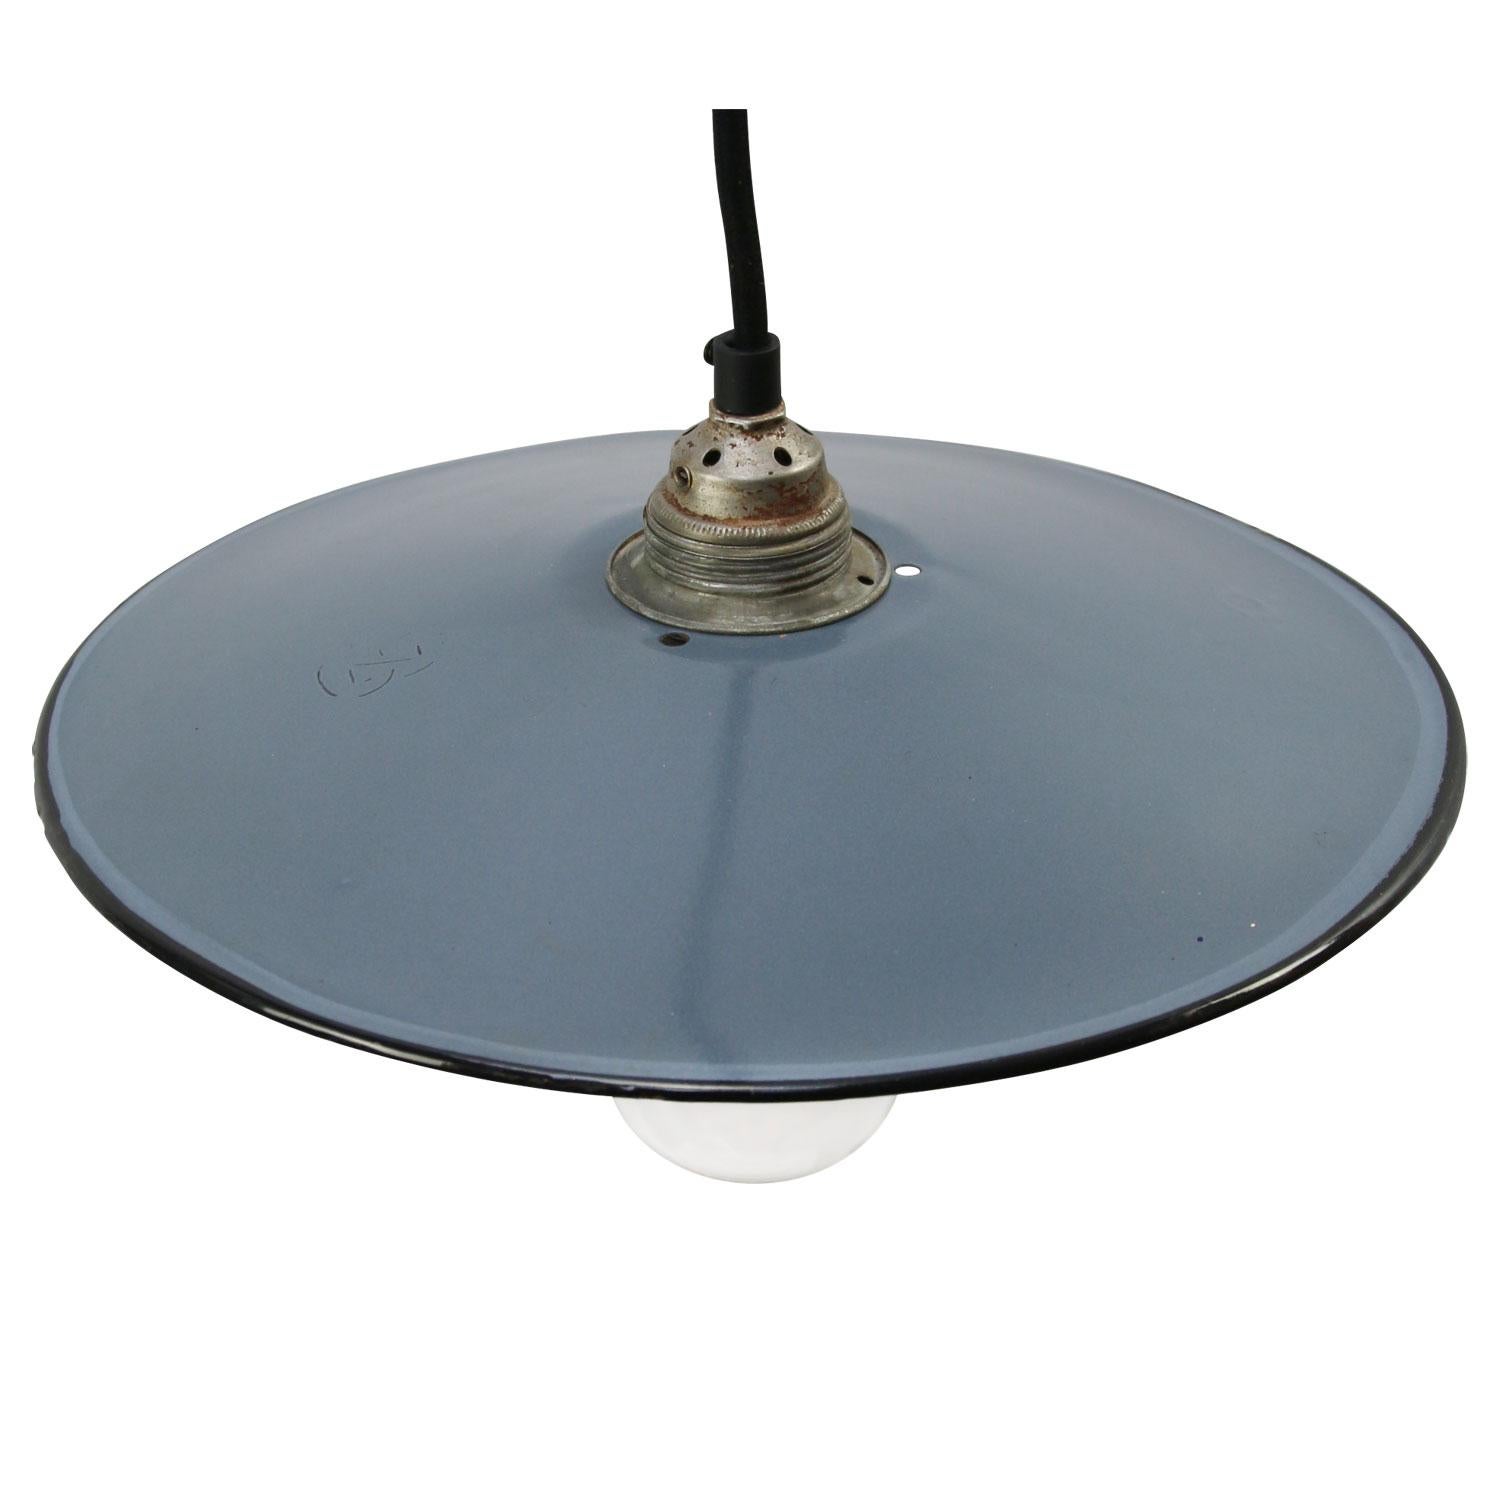 Small French industrial pendant. 

Weight 0.70 kg / 1.5 lb

Priced per individual item. All lamps have been made suitable by international standards for incandescent light bulbs, energy-efficient and LED bulbs. E26/E27 bulb holders and new